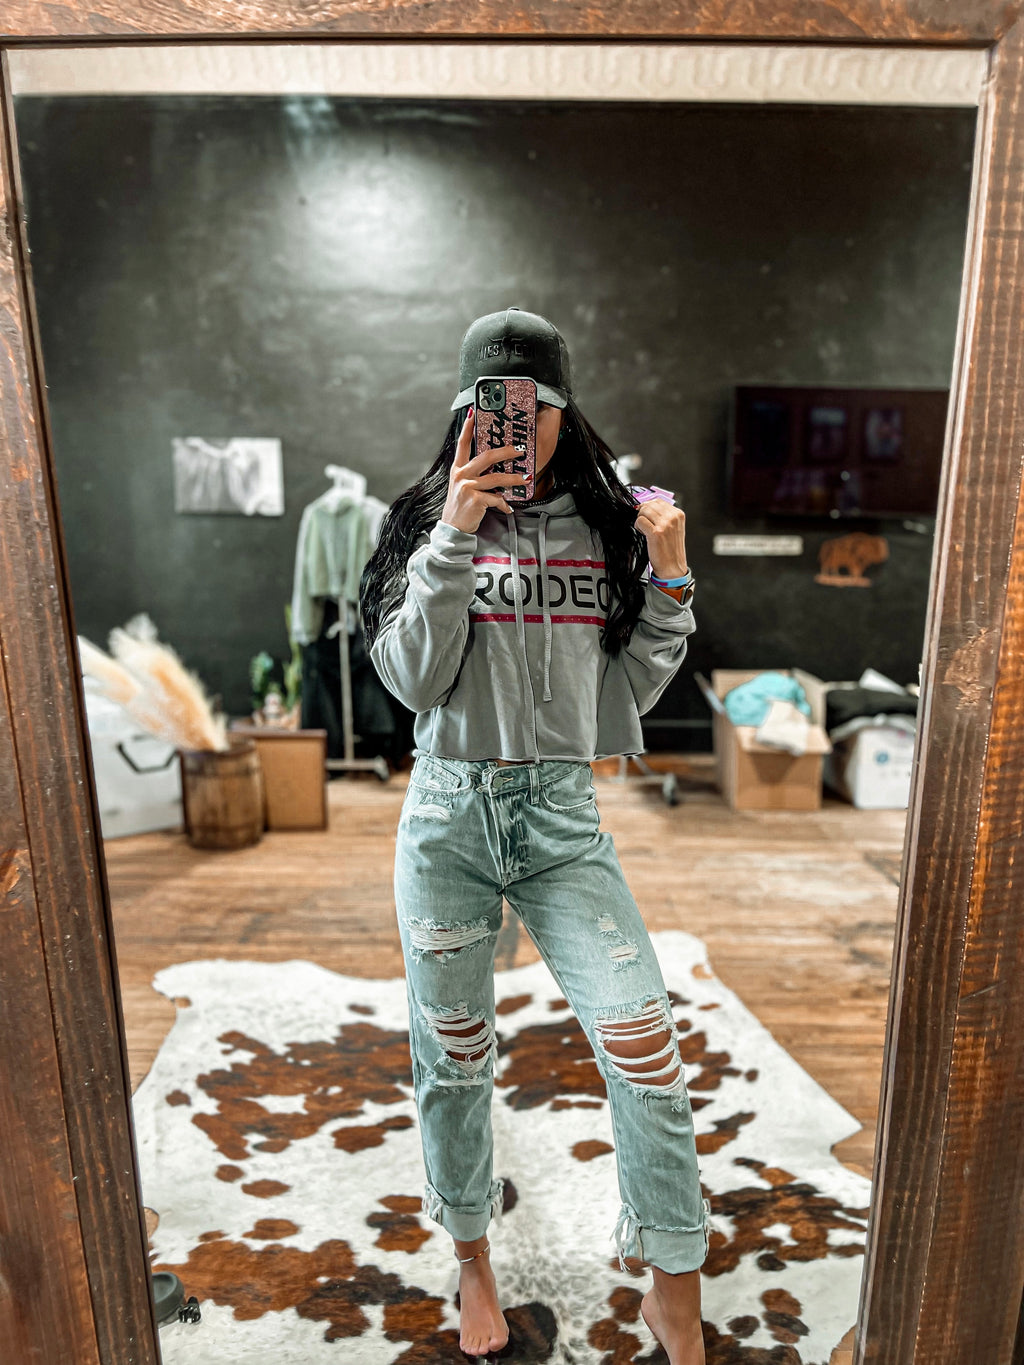 RODEO Cropped Hoodie